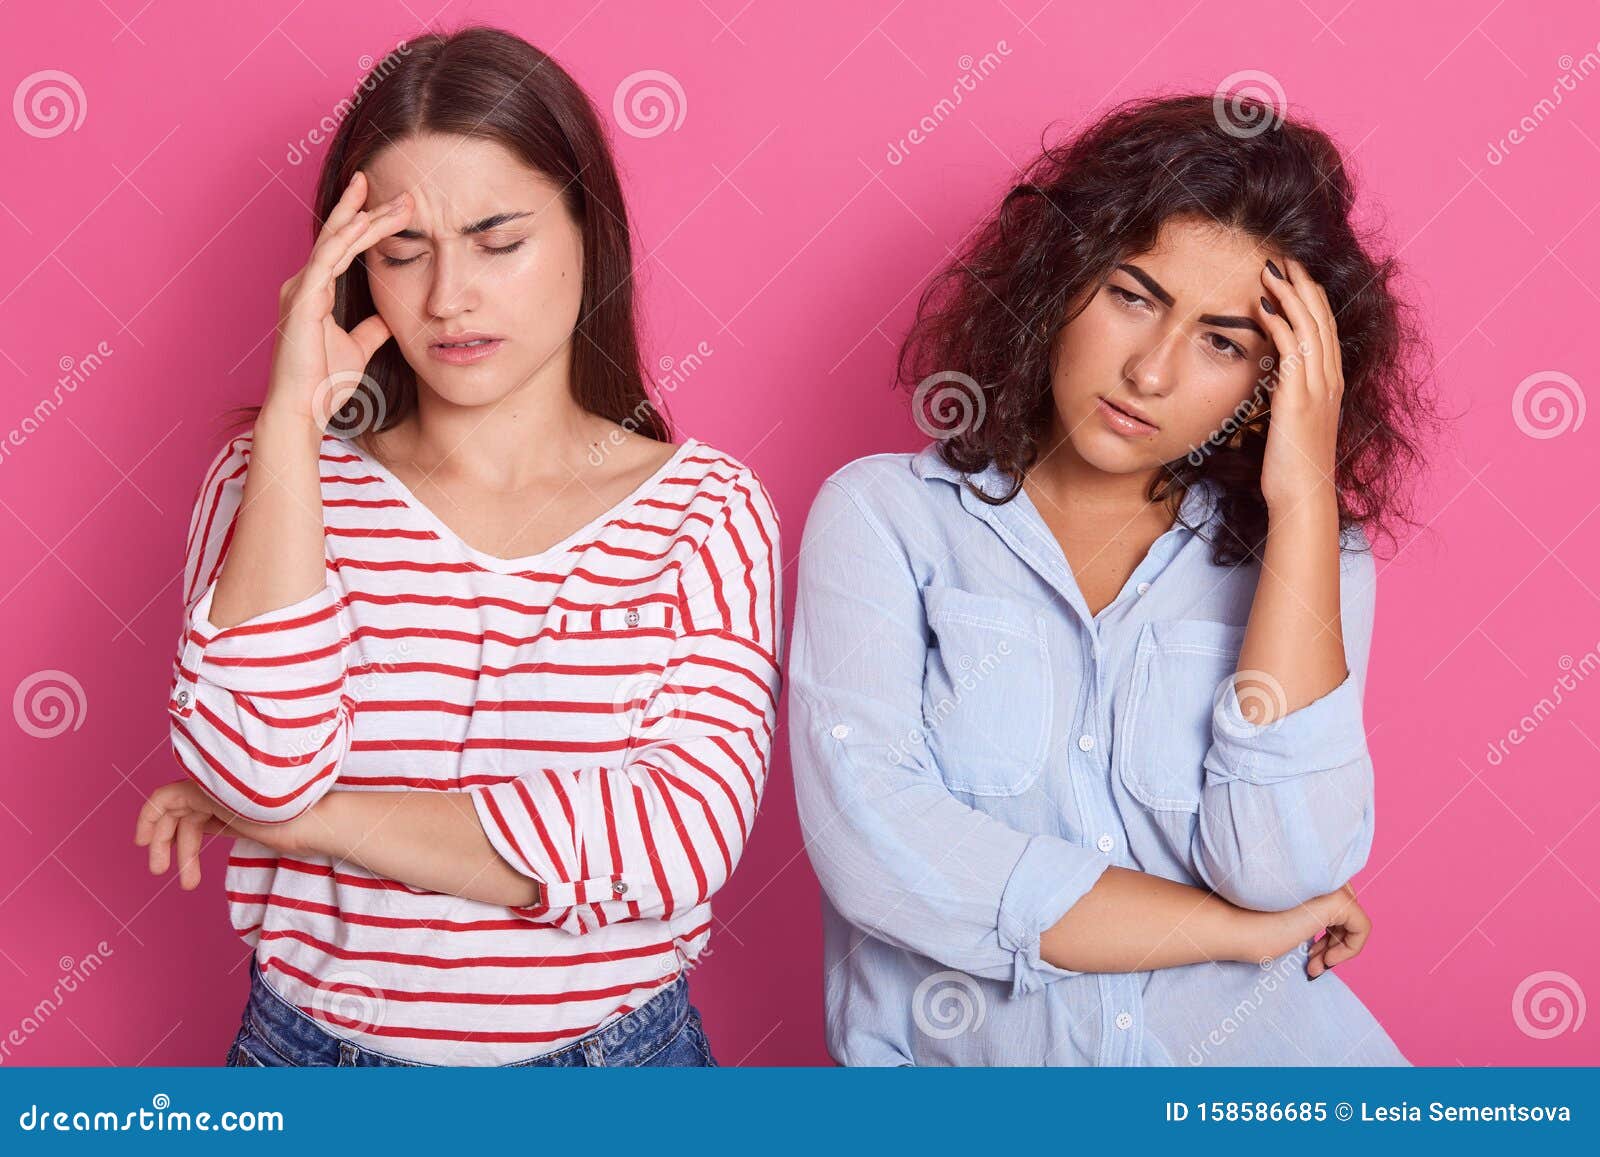 Horizontal Shotof Two Women Standing and Keeping Hands on Forehead ...